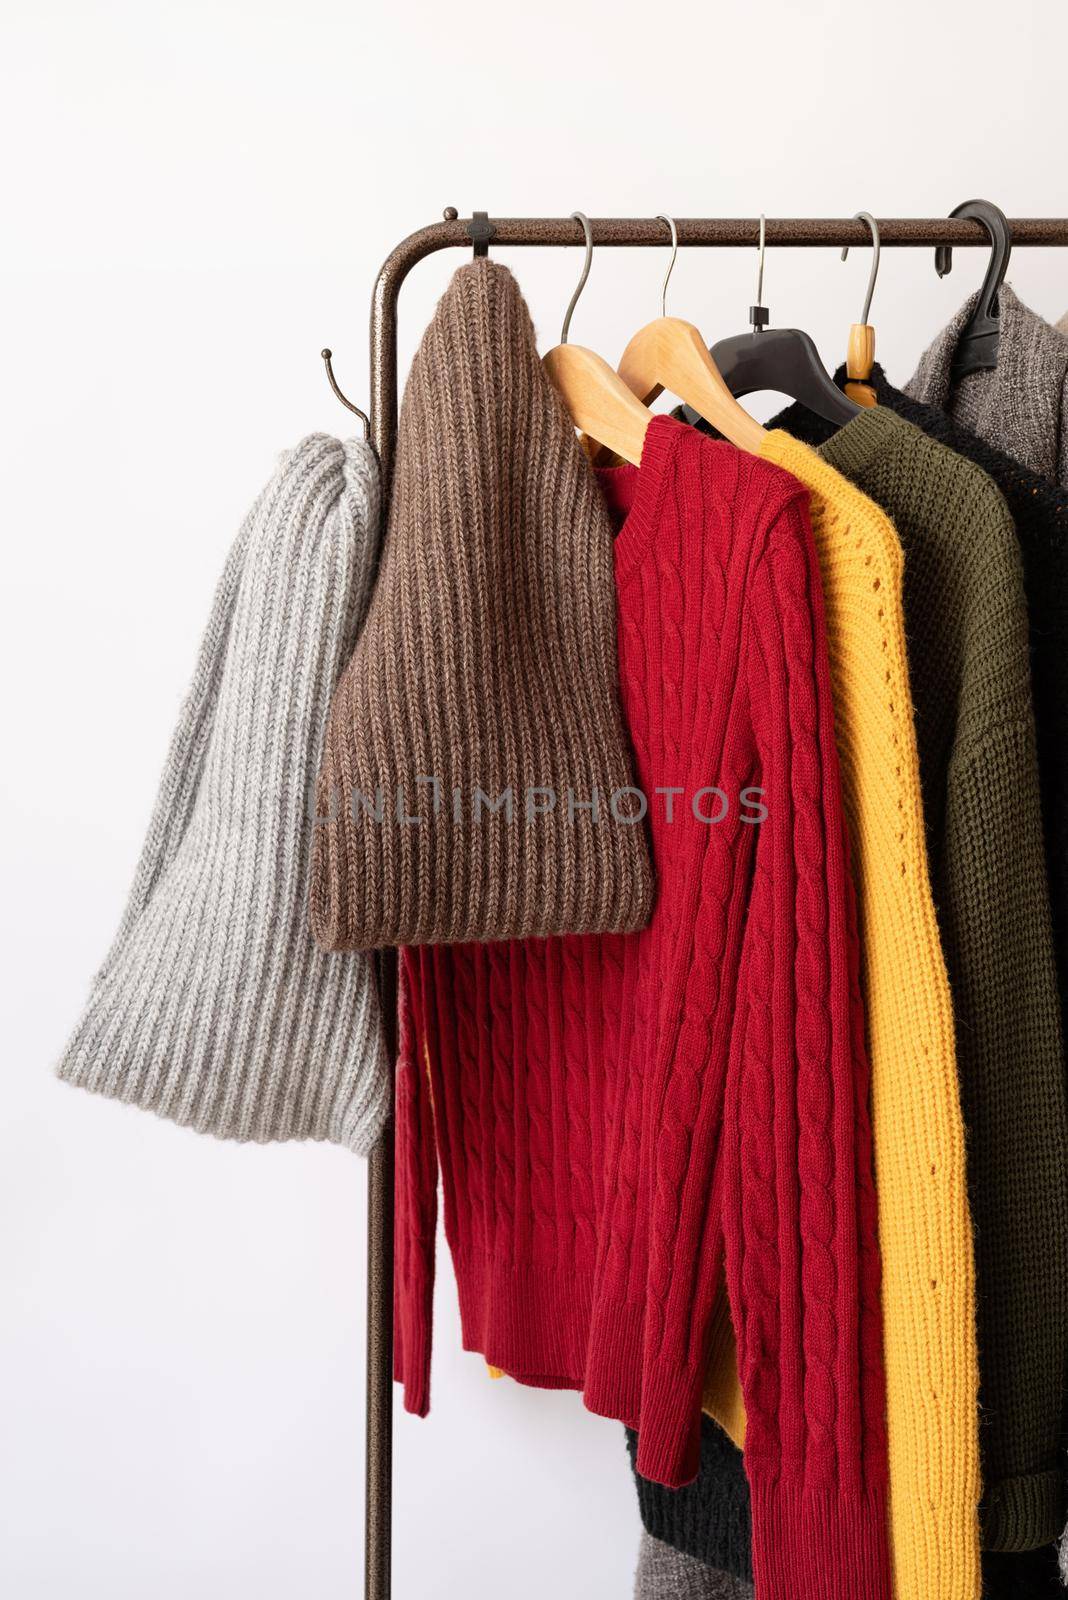 Row of different colorful Knitted sweaters hang on hangers, white background, autumn and winter season